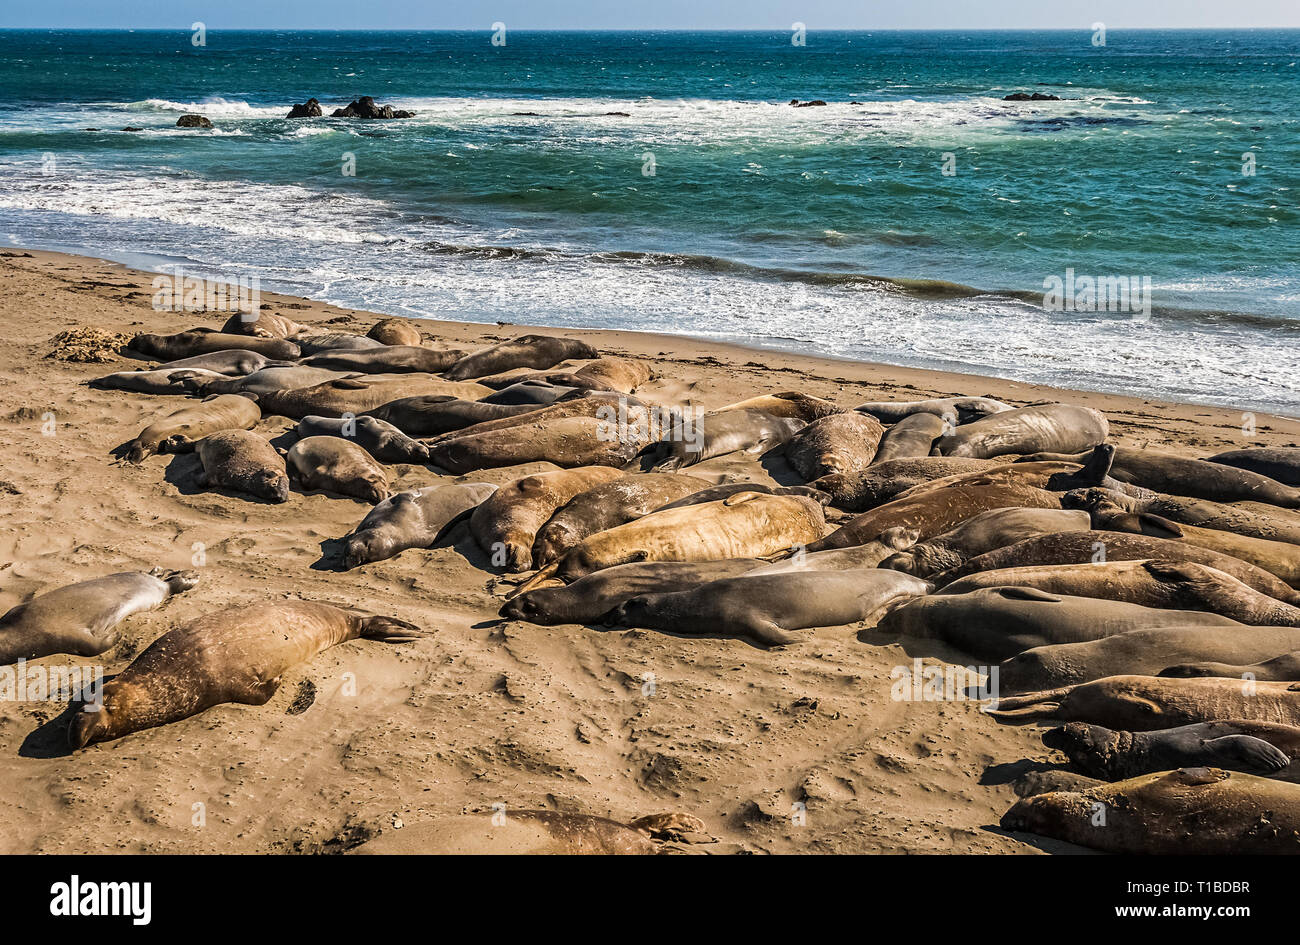 Elephant seals, mirounga angustinostris, group sleeping in the sand on late afternoon at Elephant Seal Vista Point, along Cabrillo Highway, Pacific Ca Stock Photo